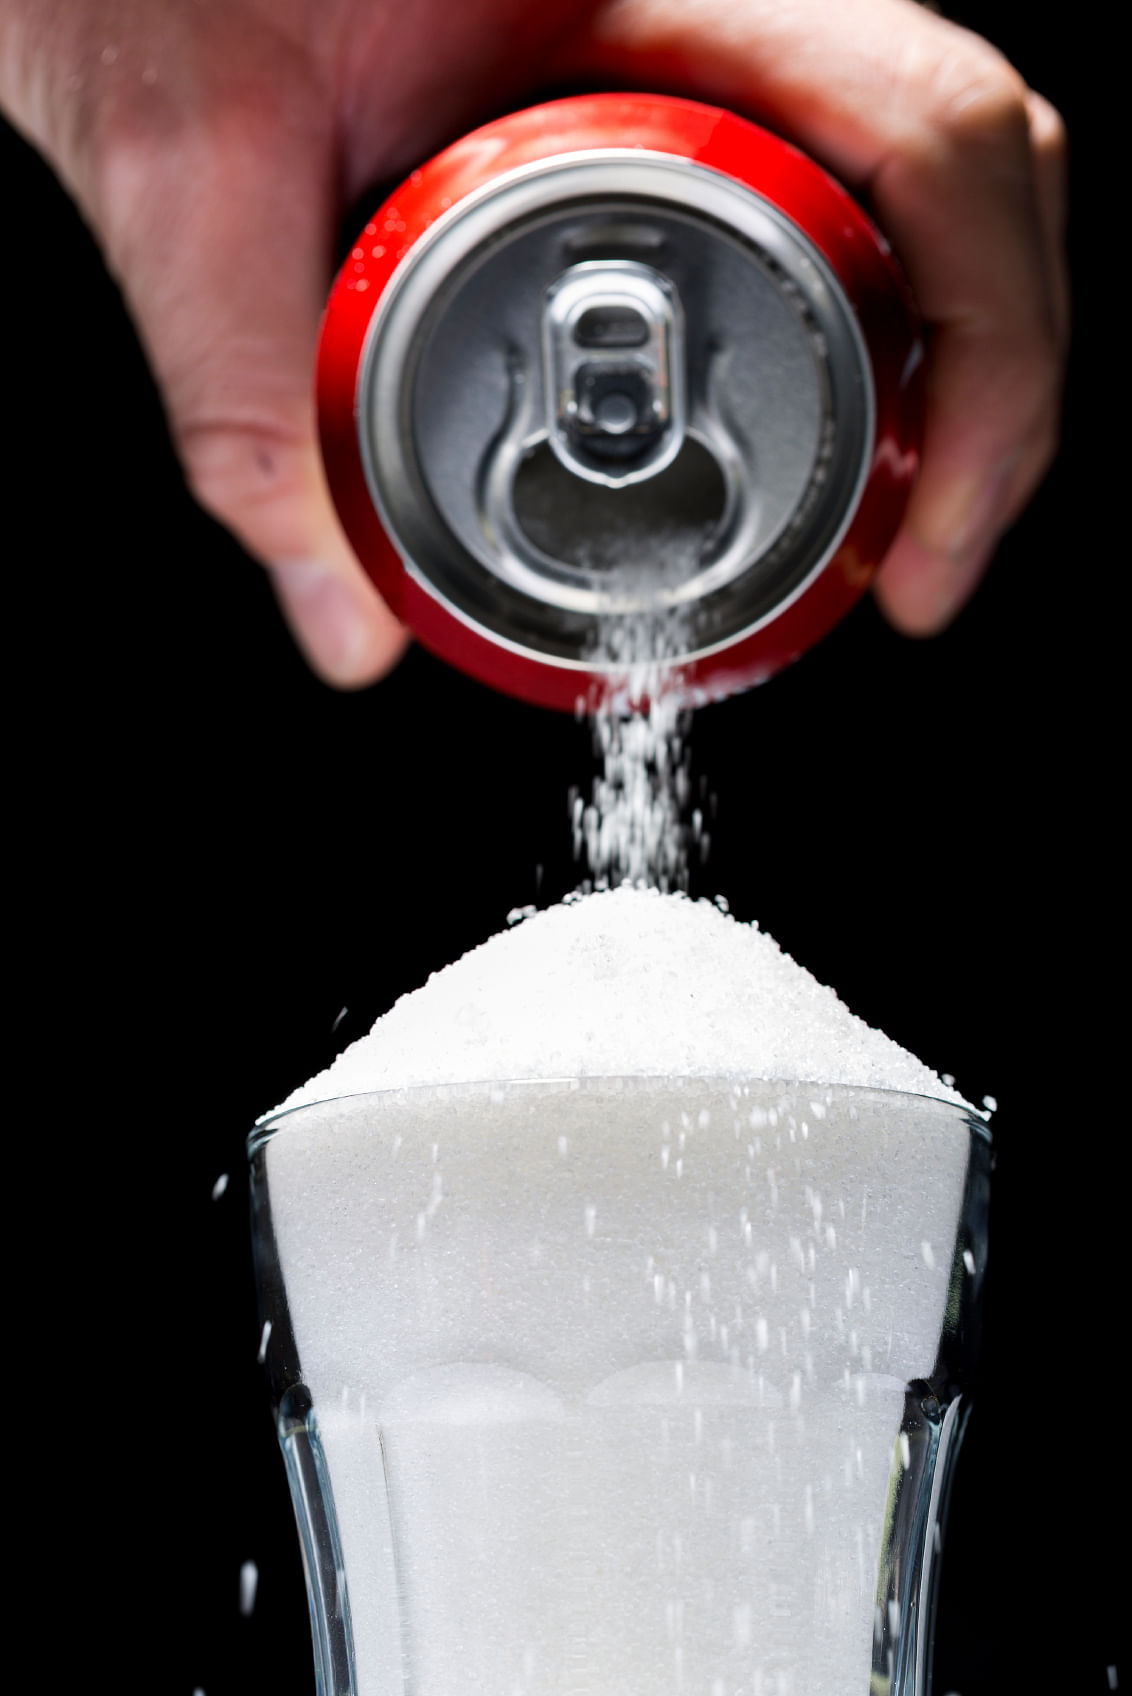 As if you needed another reason to kick this bad habit, drinking soda can harm your ticker